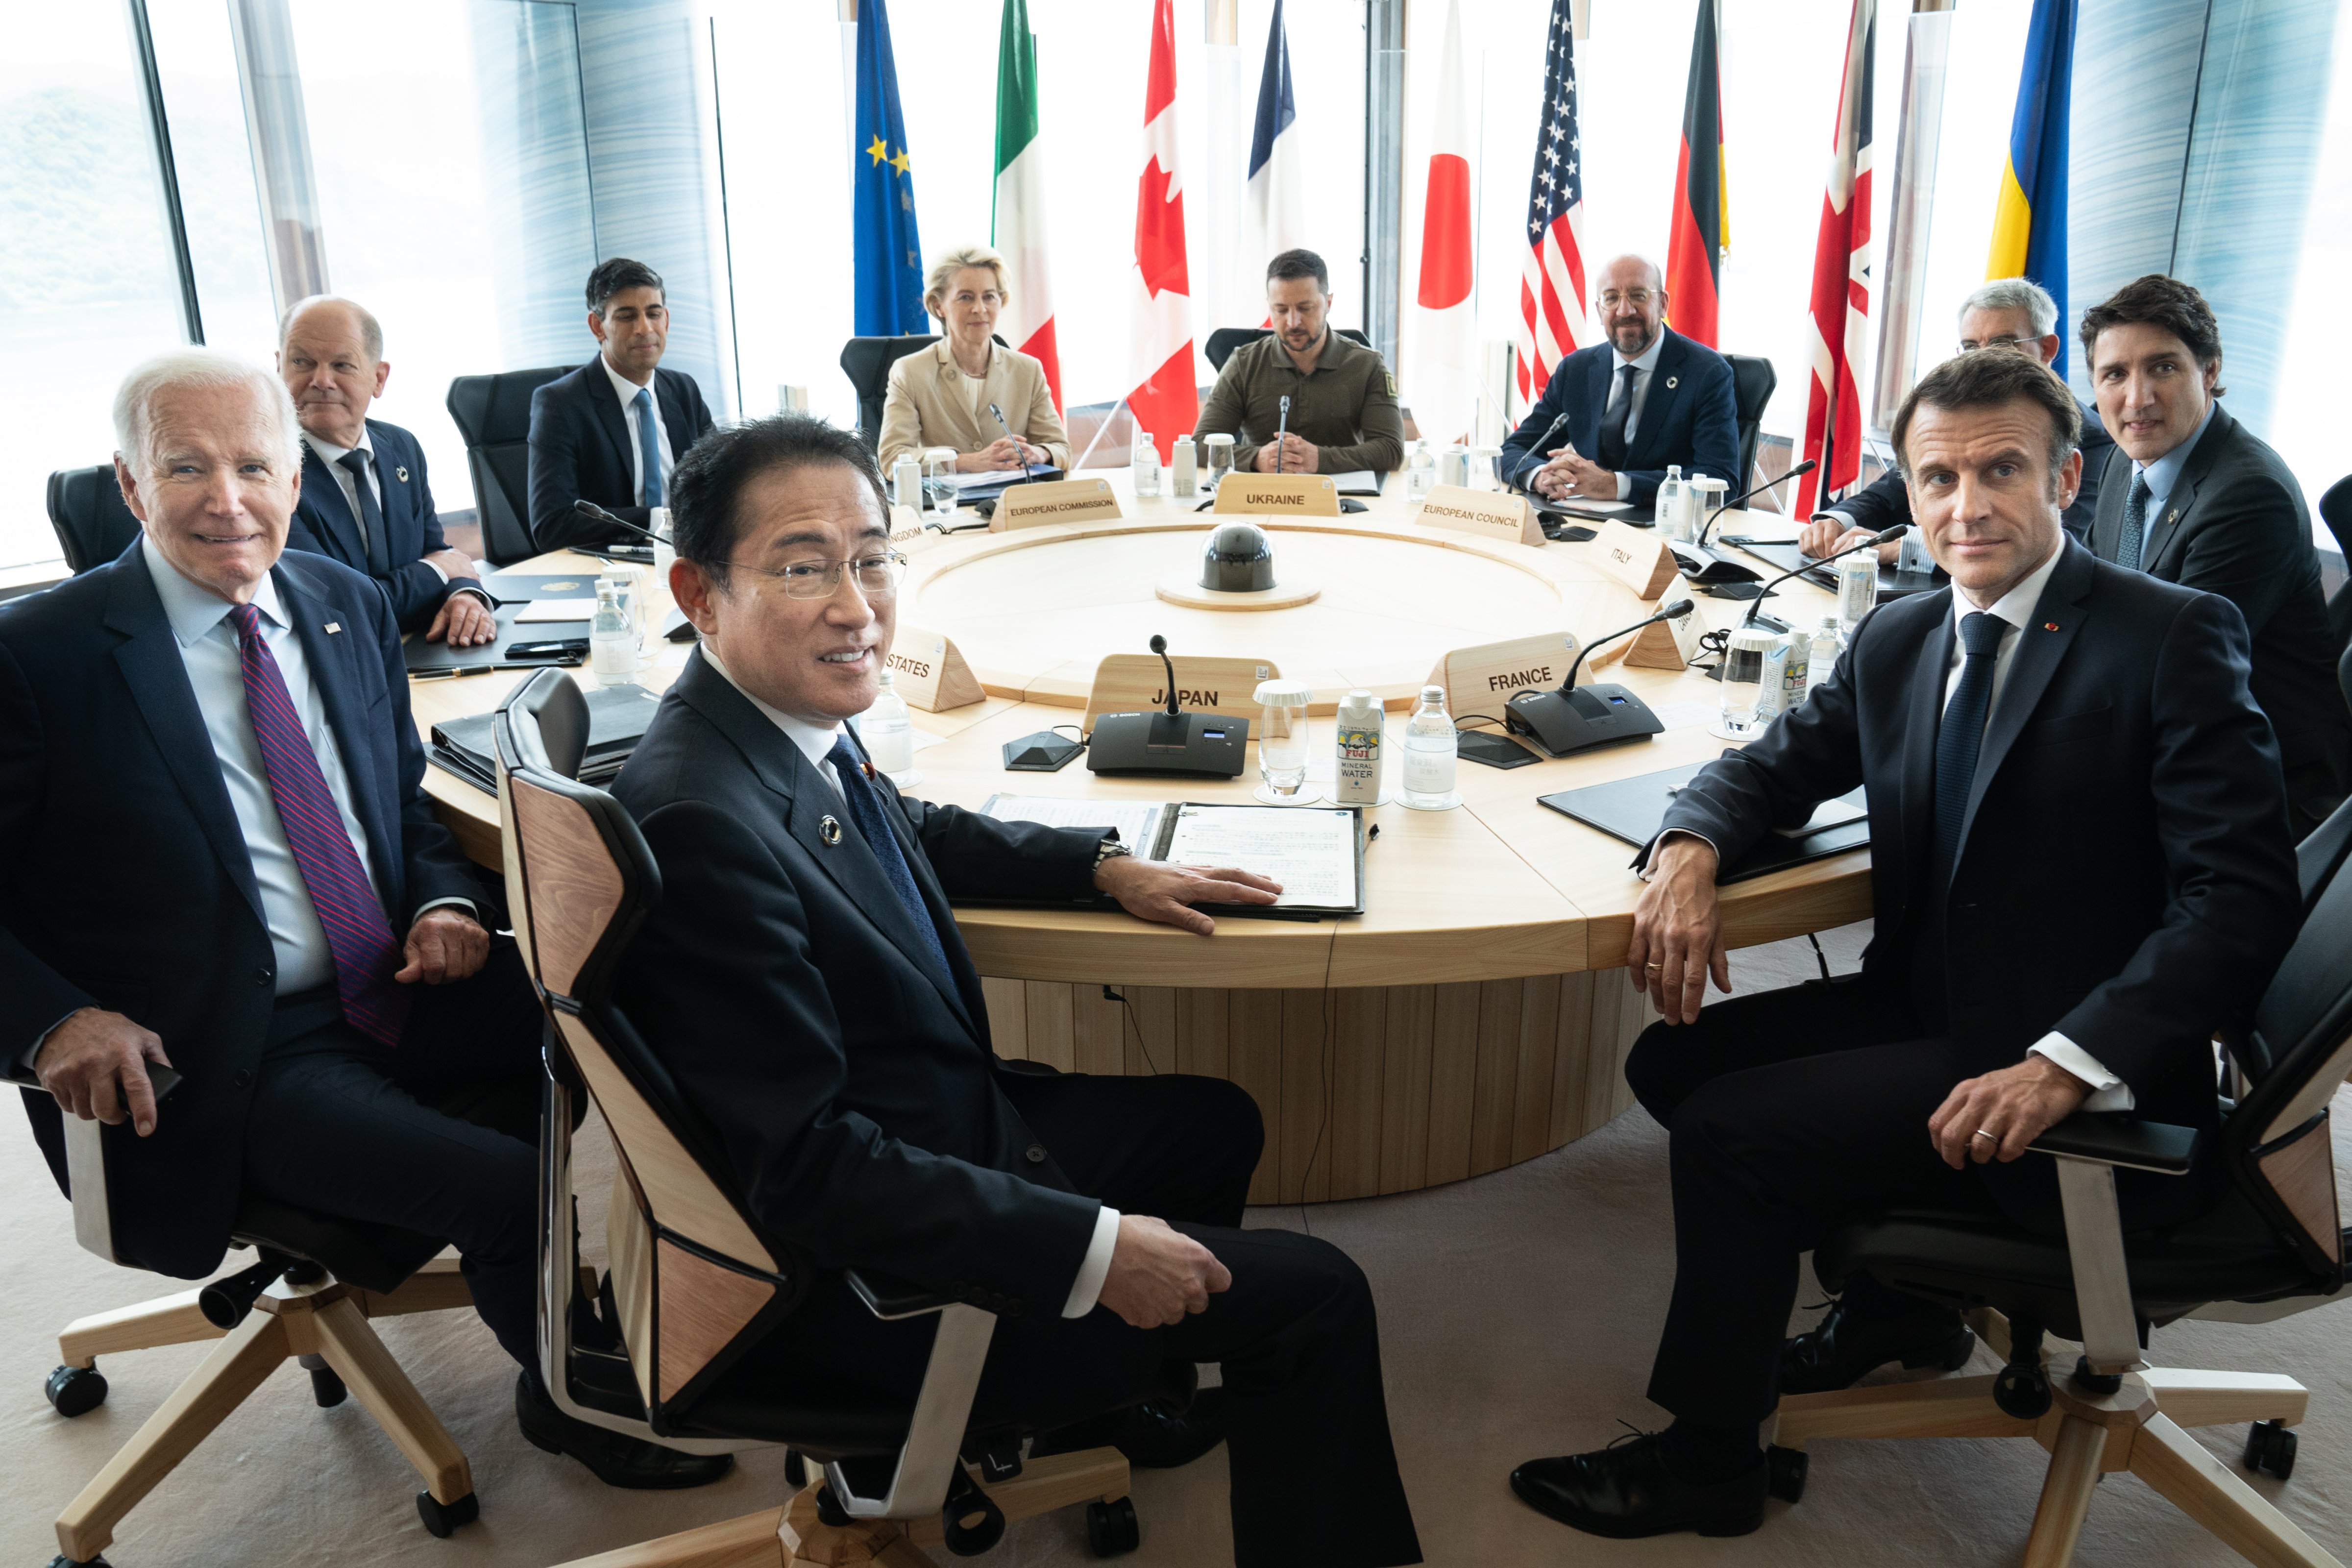 Ukrainian President Volodymyr Zelensky joins G7 world leaders at a working session on the final day of the G7 Summit on May 21, 2023 in Hiroshima, Japan. (Stefan Rousseau—WPA Pool/Getty Images)